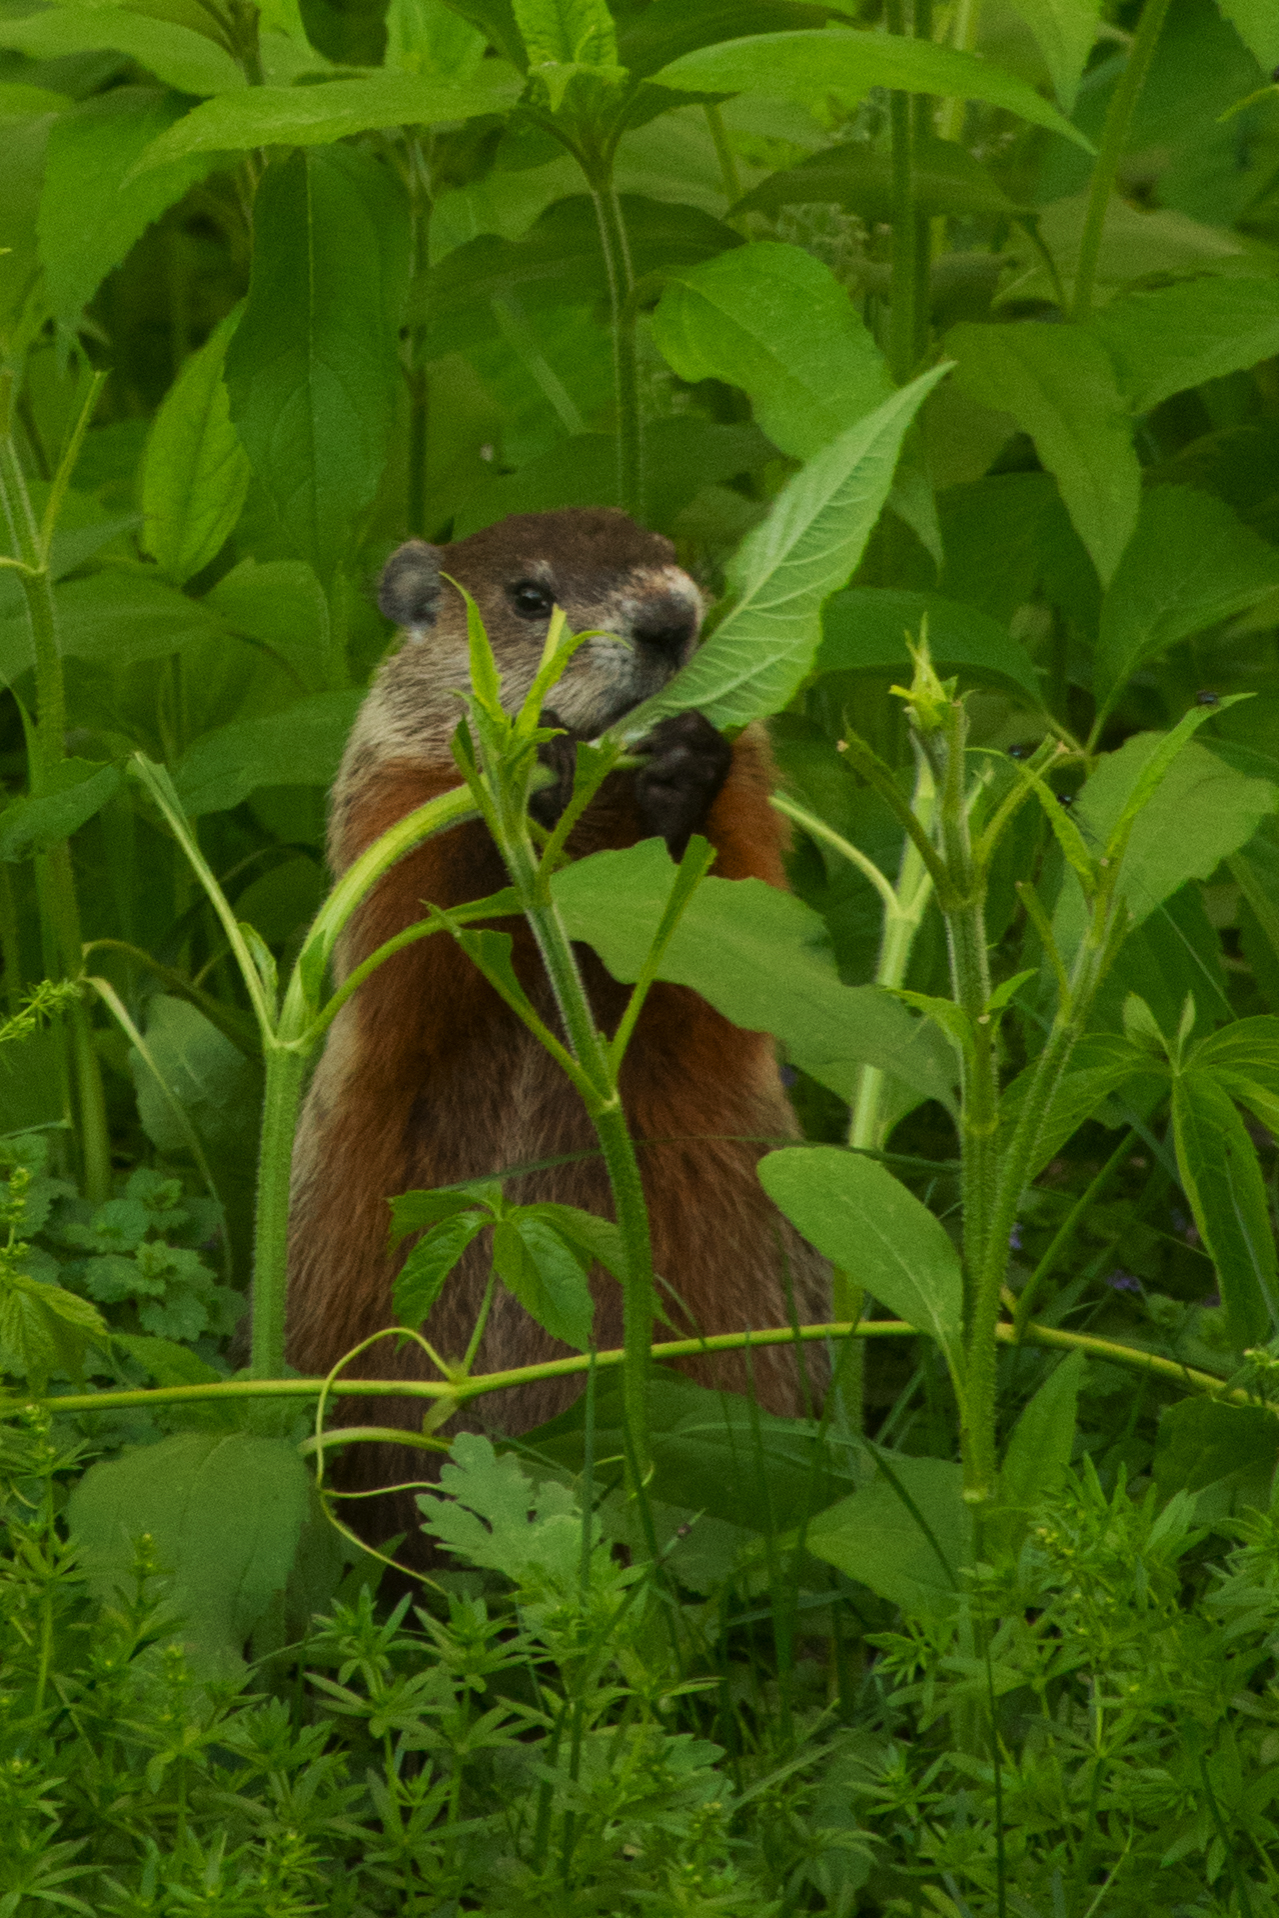  Woodchucks are hard to share the garden with, but they sure are cute.    